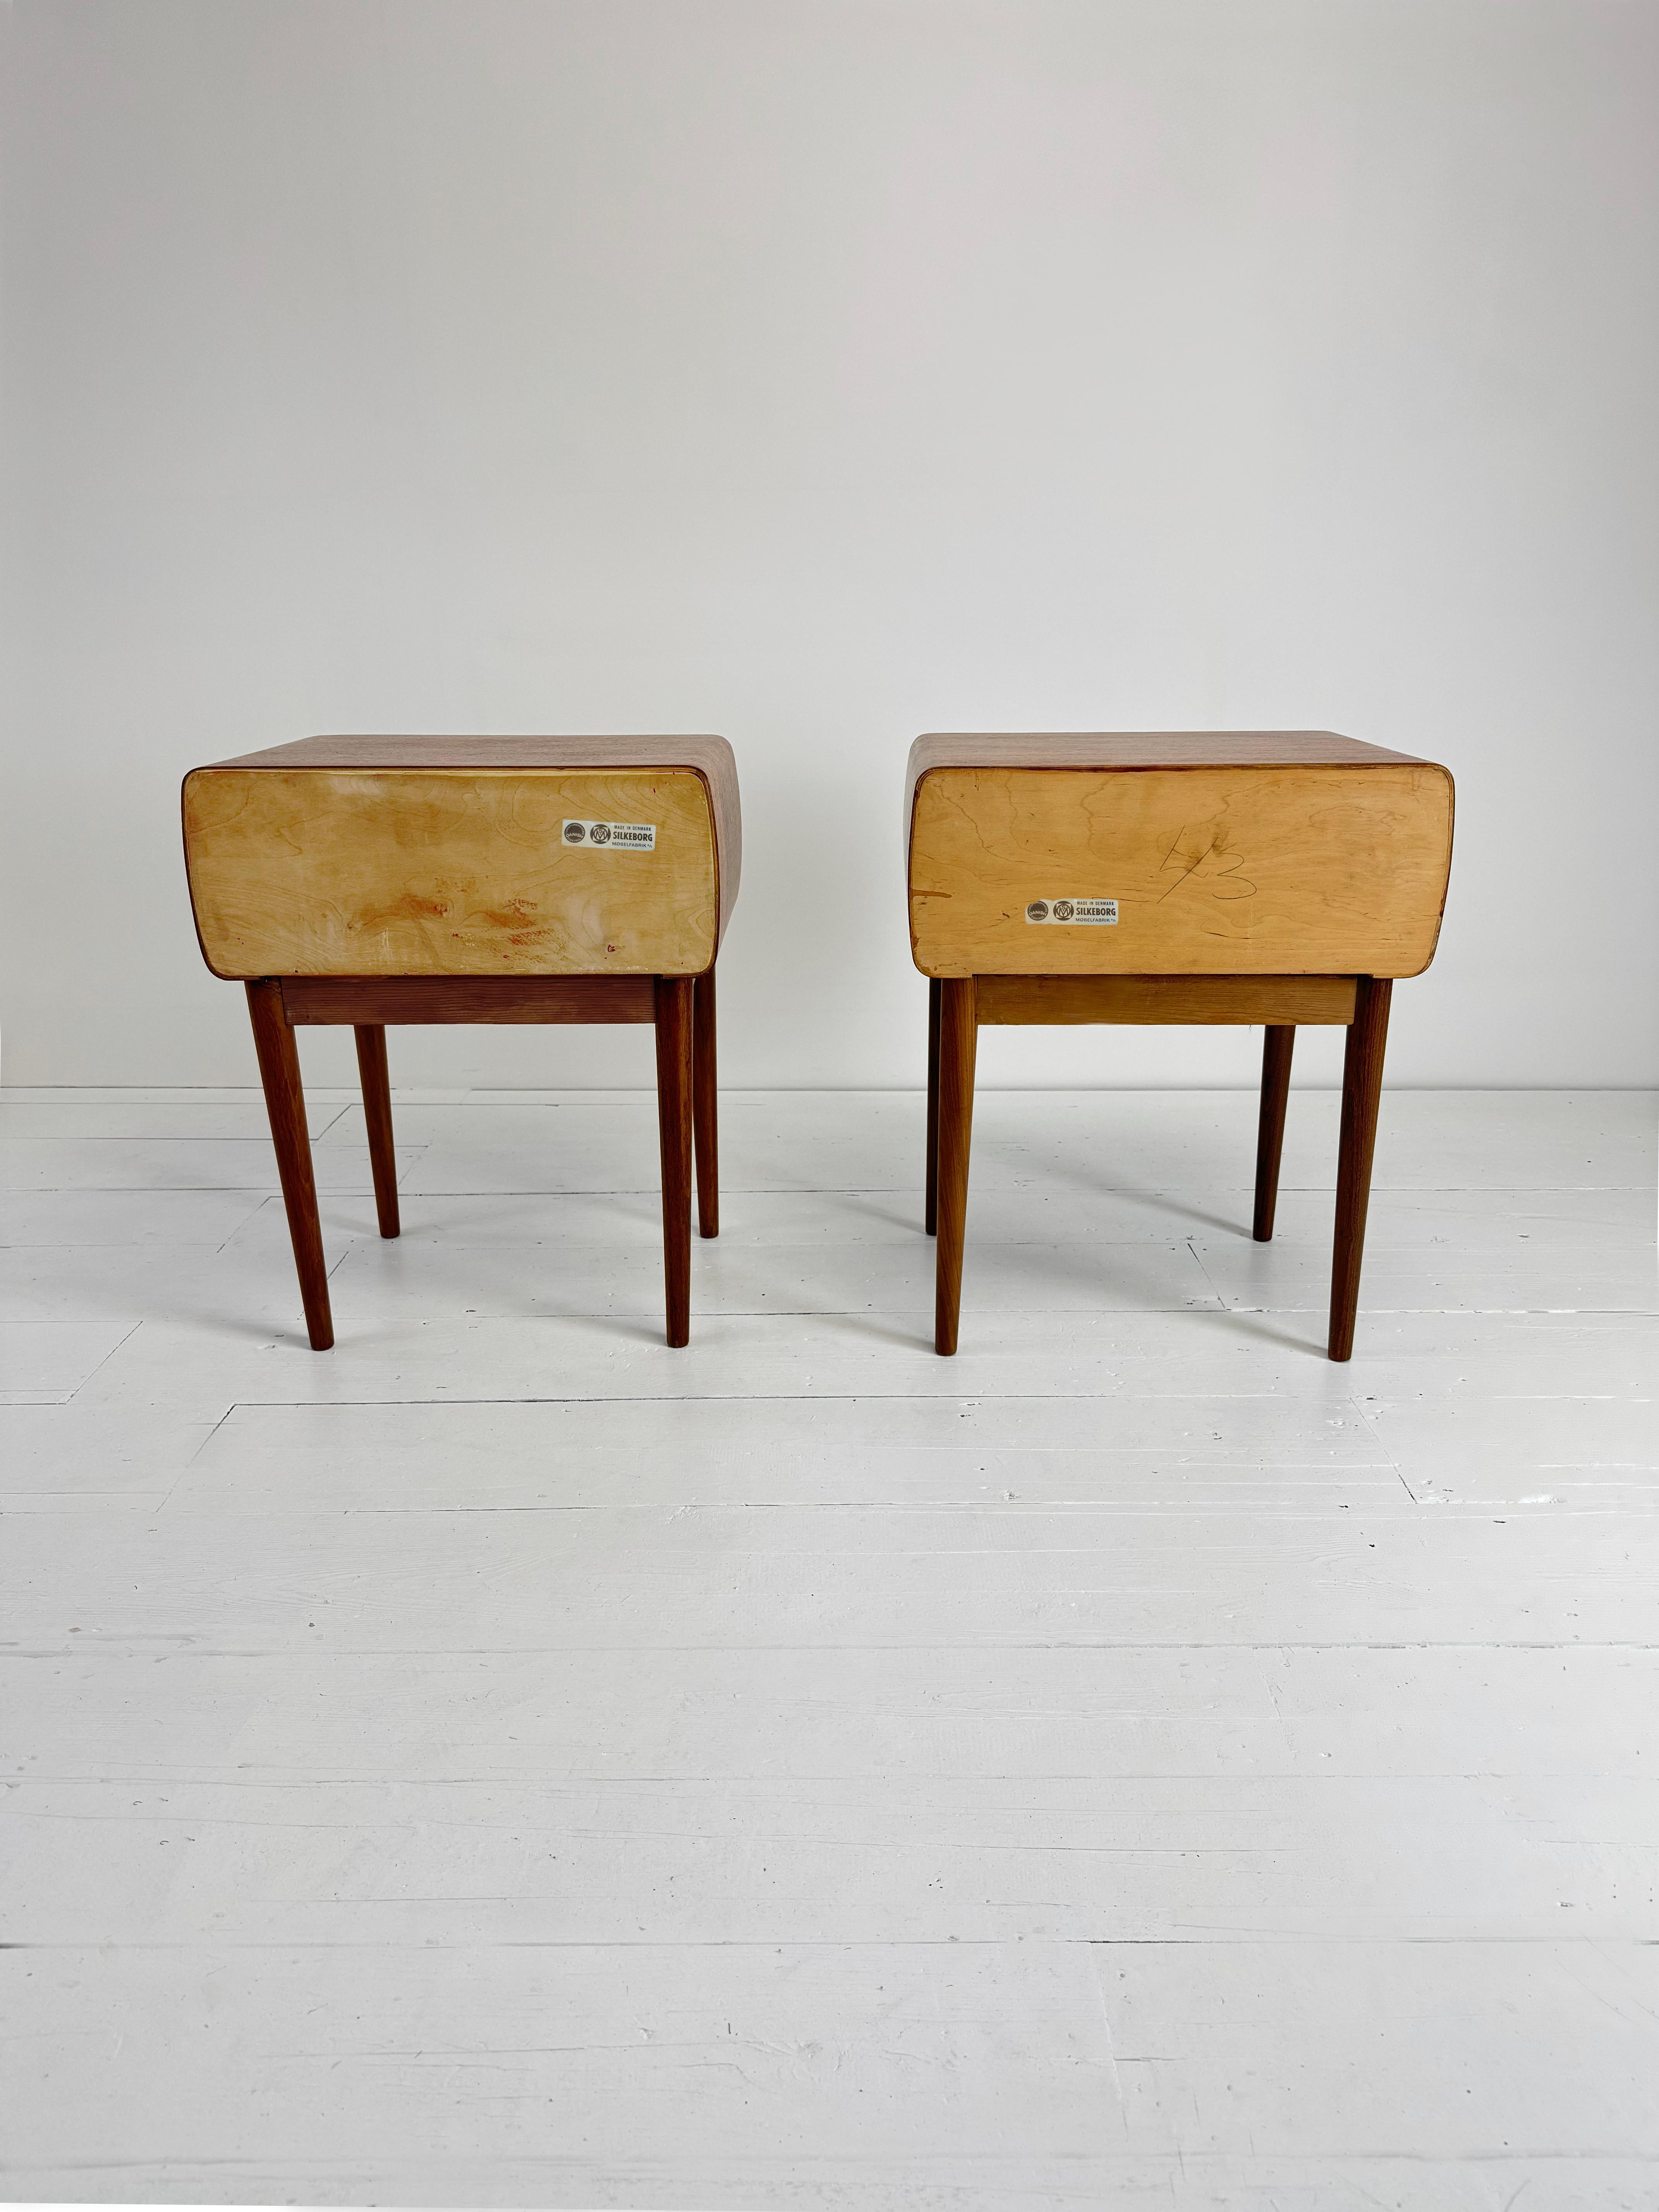 A Pair of Teak Night Stands by Johaness Andersen c.1960's For Sale 5